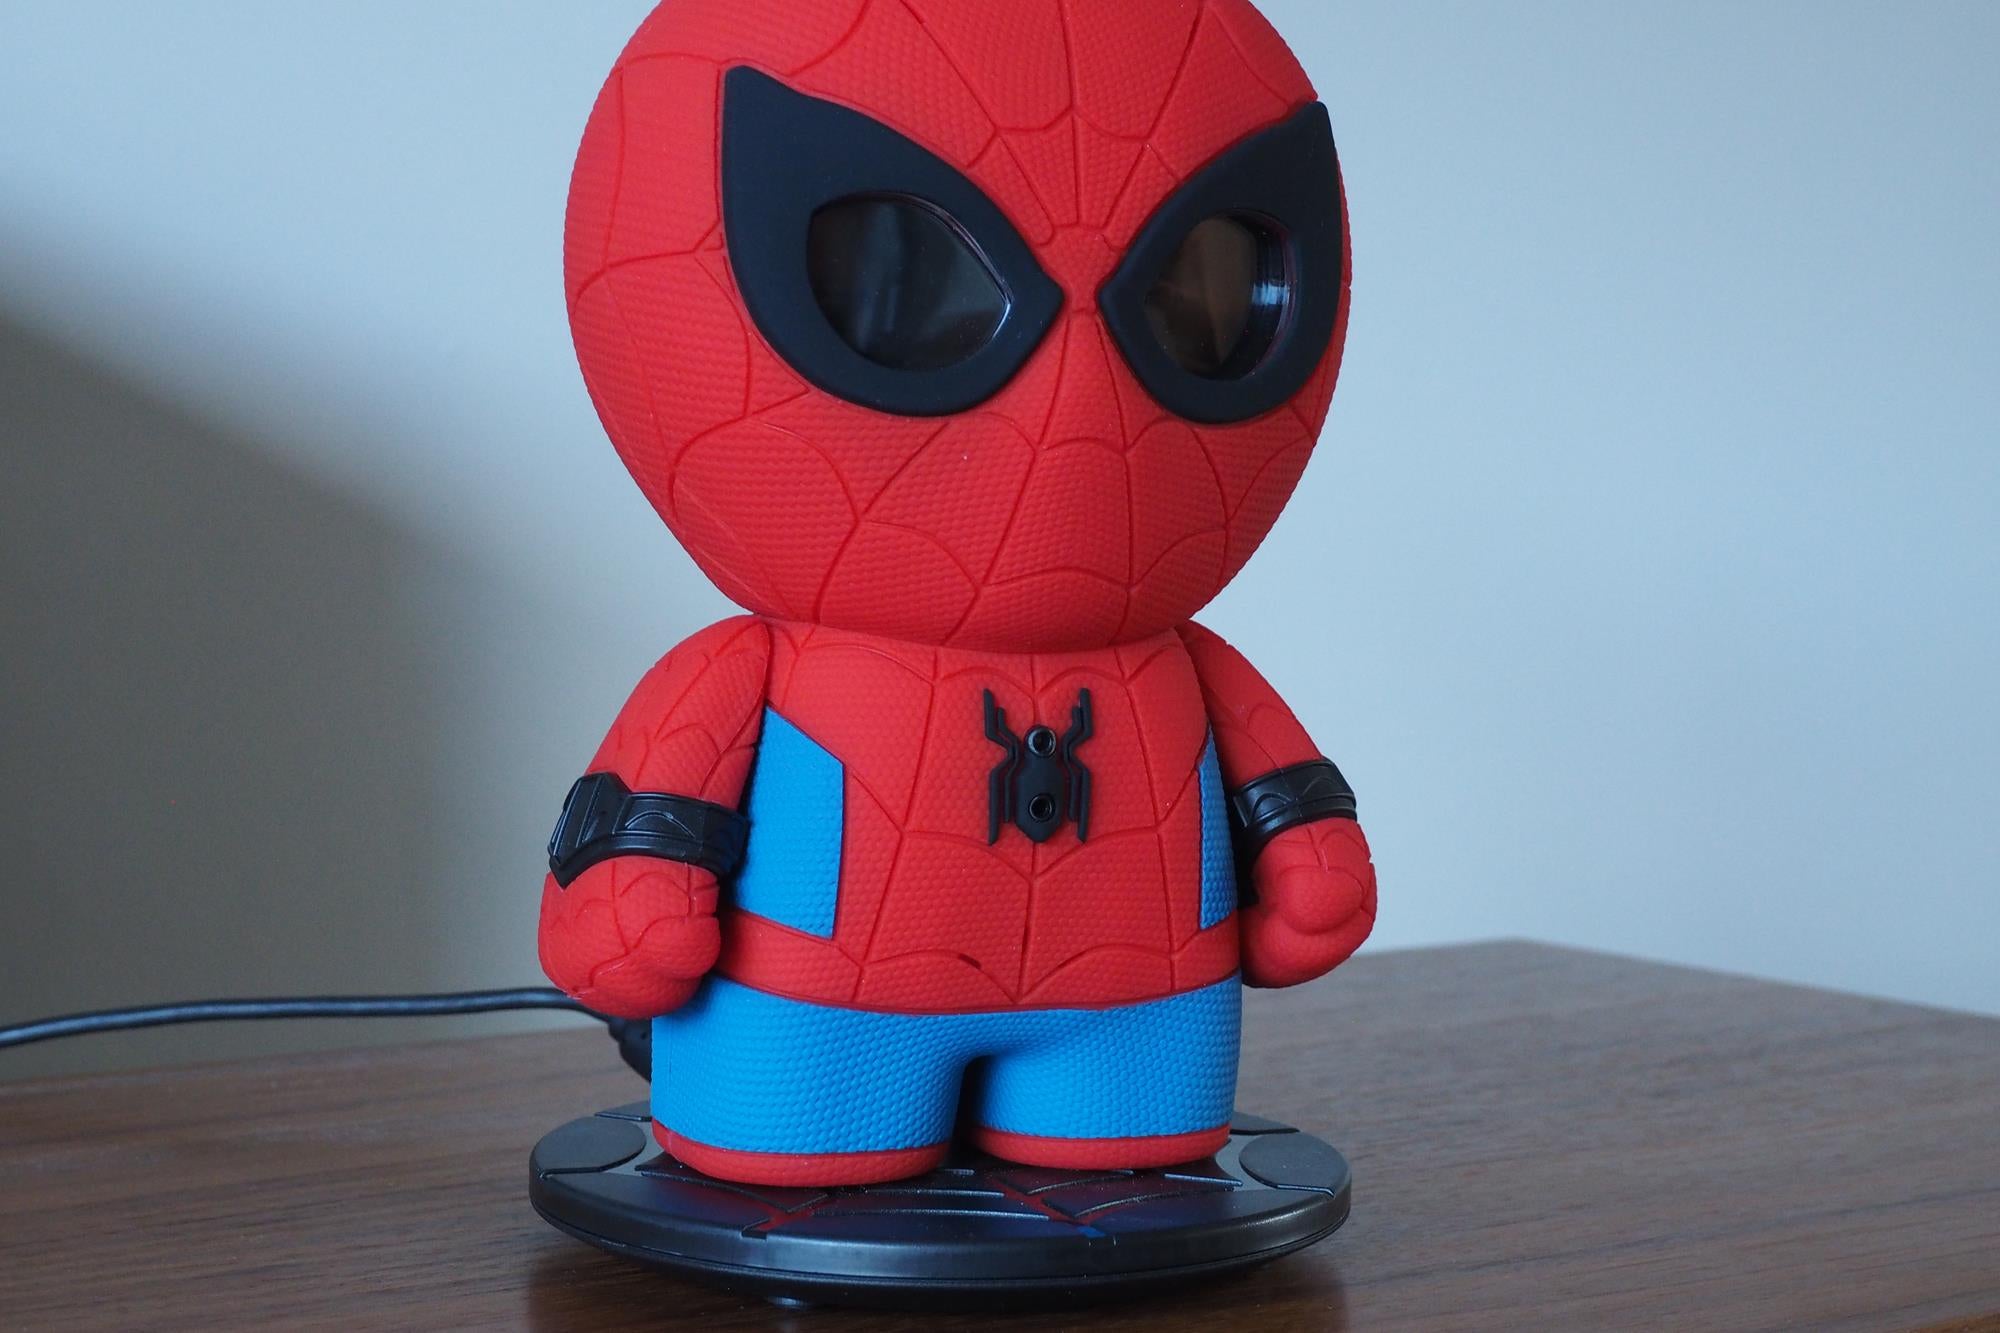 Sphero Spider-Man interactive toy on a table.